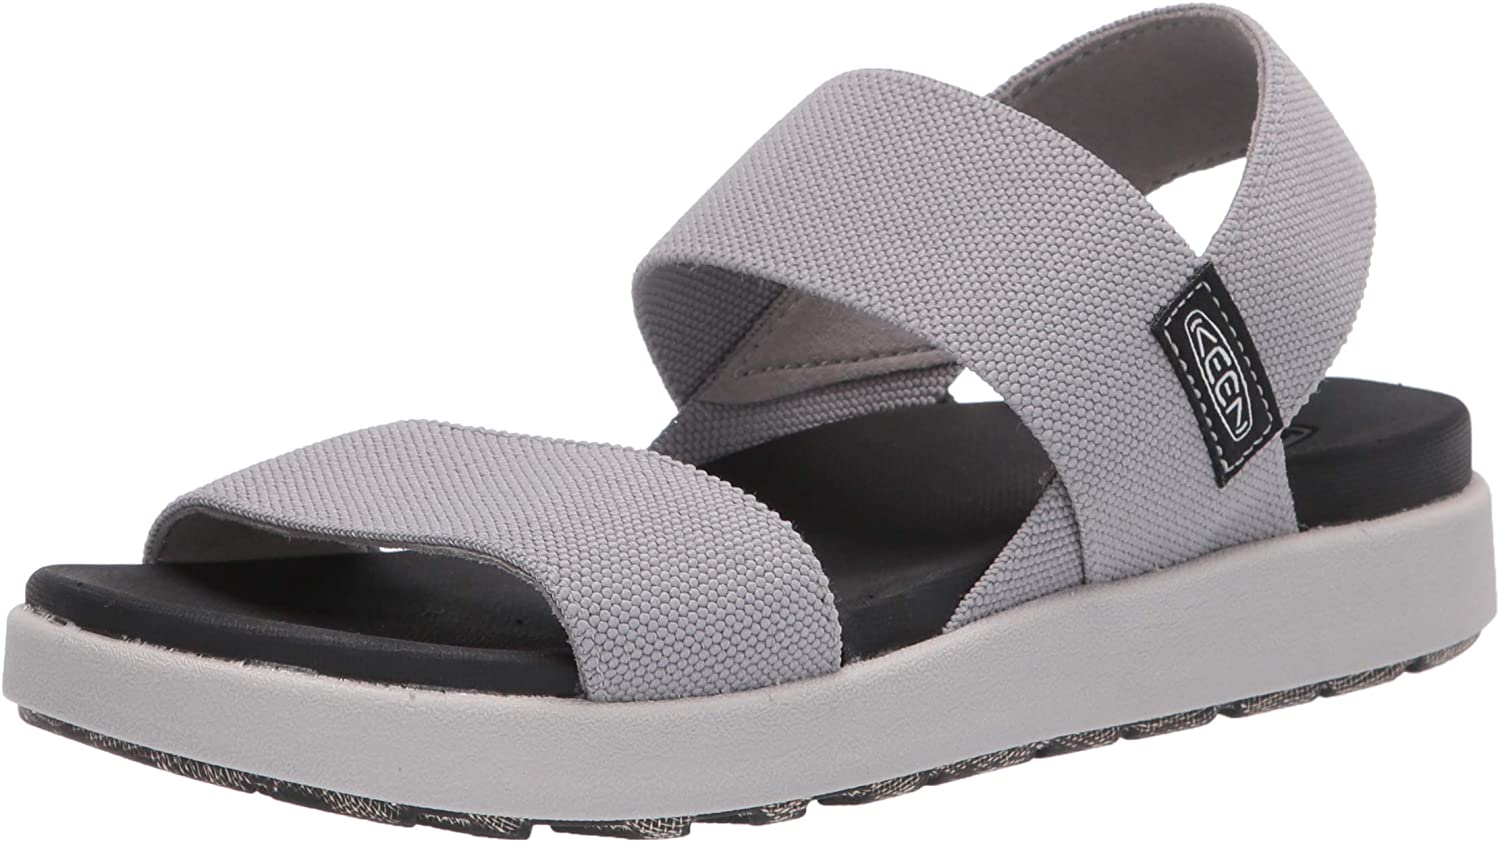 Keen Sandals Review : Elle Stretch Sandals with a Backstrap